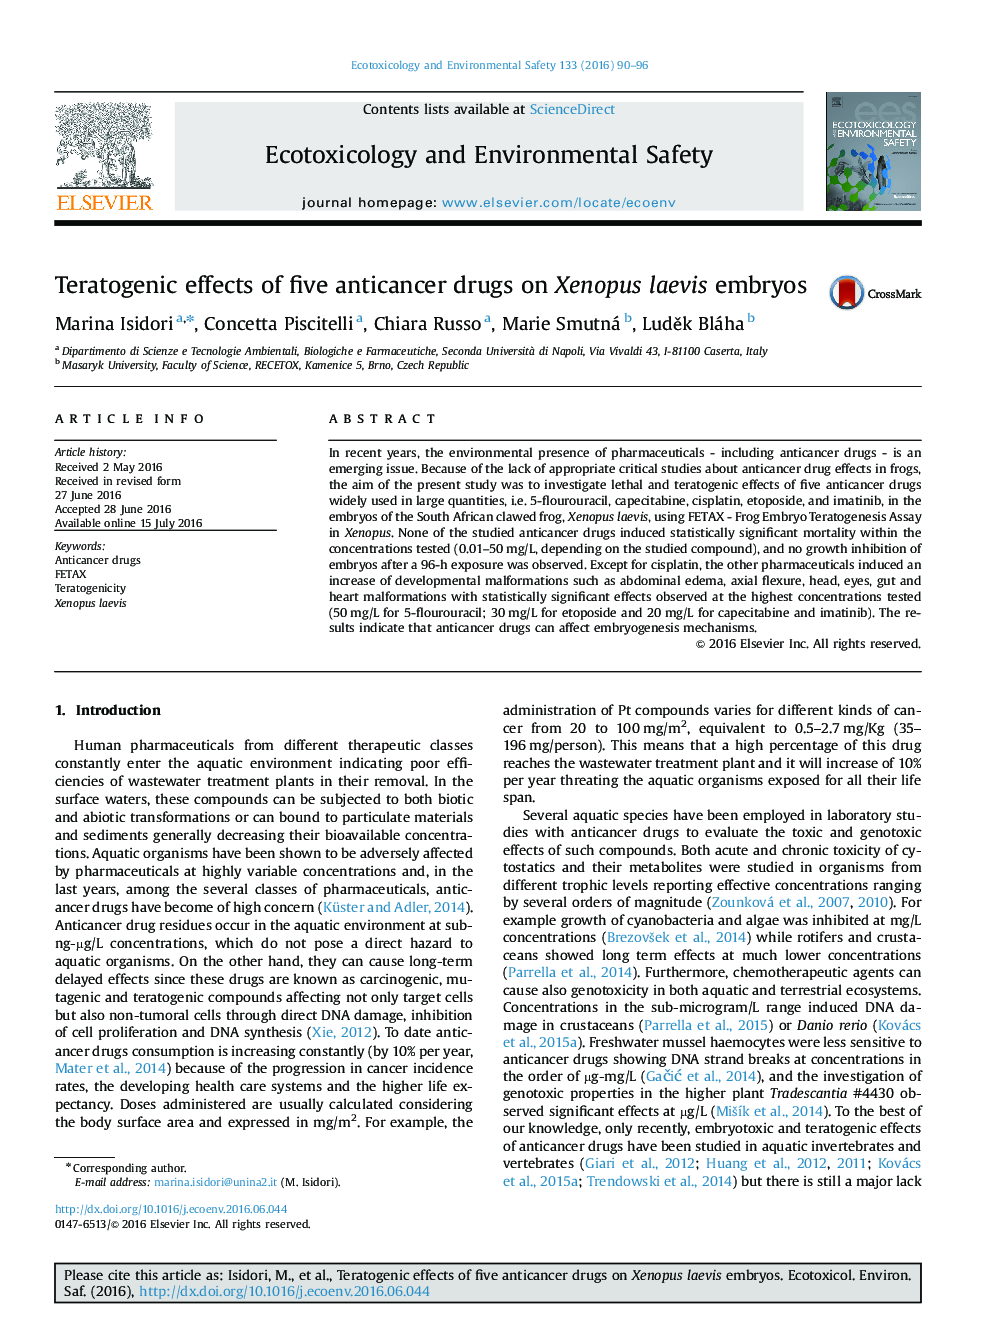 Teratogenic effects of five anticancer drugs on Xenopus laevis embryos